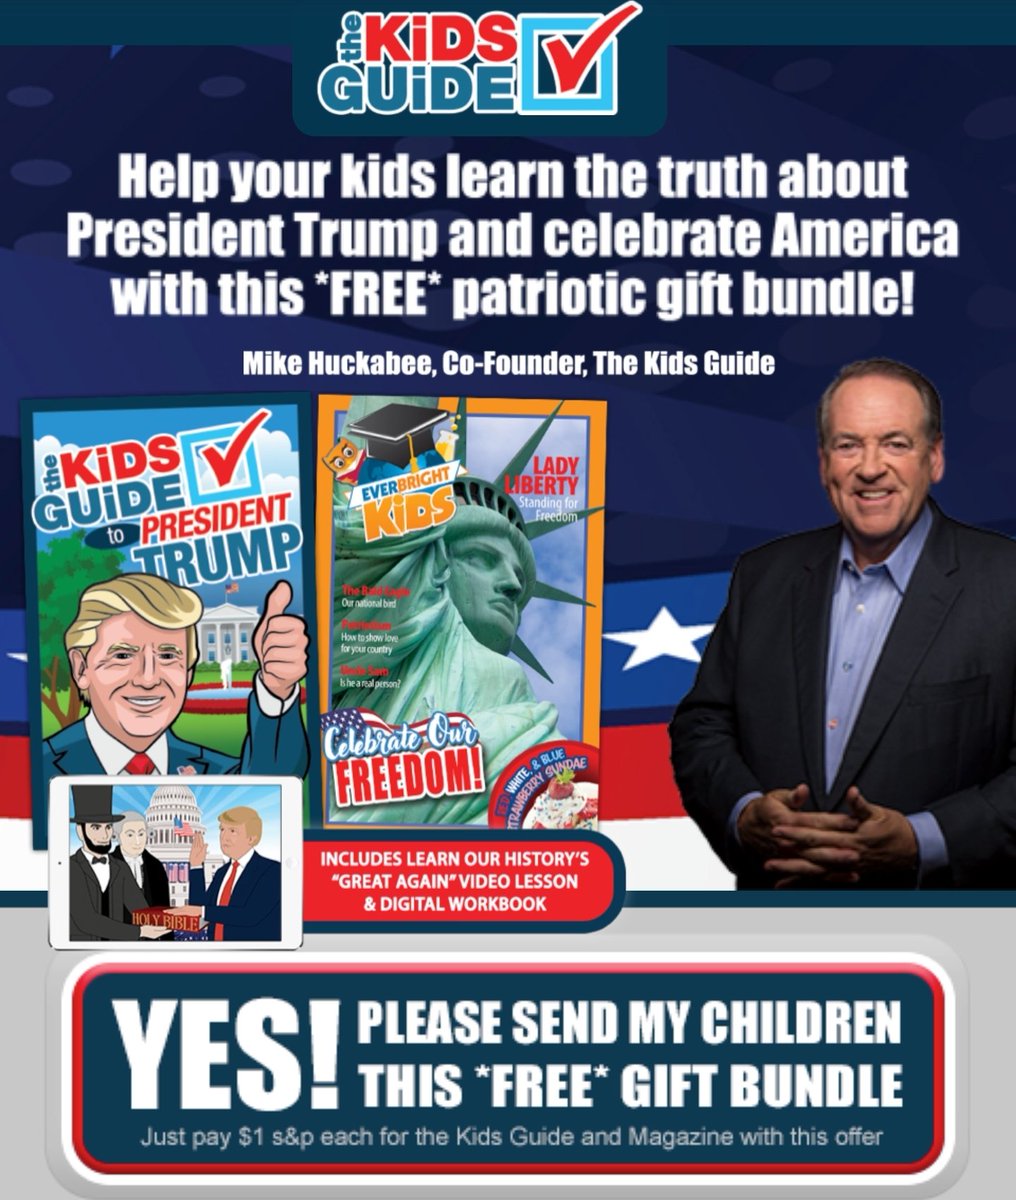 Via  @tina_nguyen, here's another addition to this thread. Mike Huckabee has decided to get into the kiddie Trump worship business.